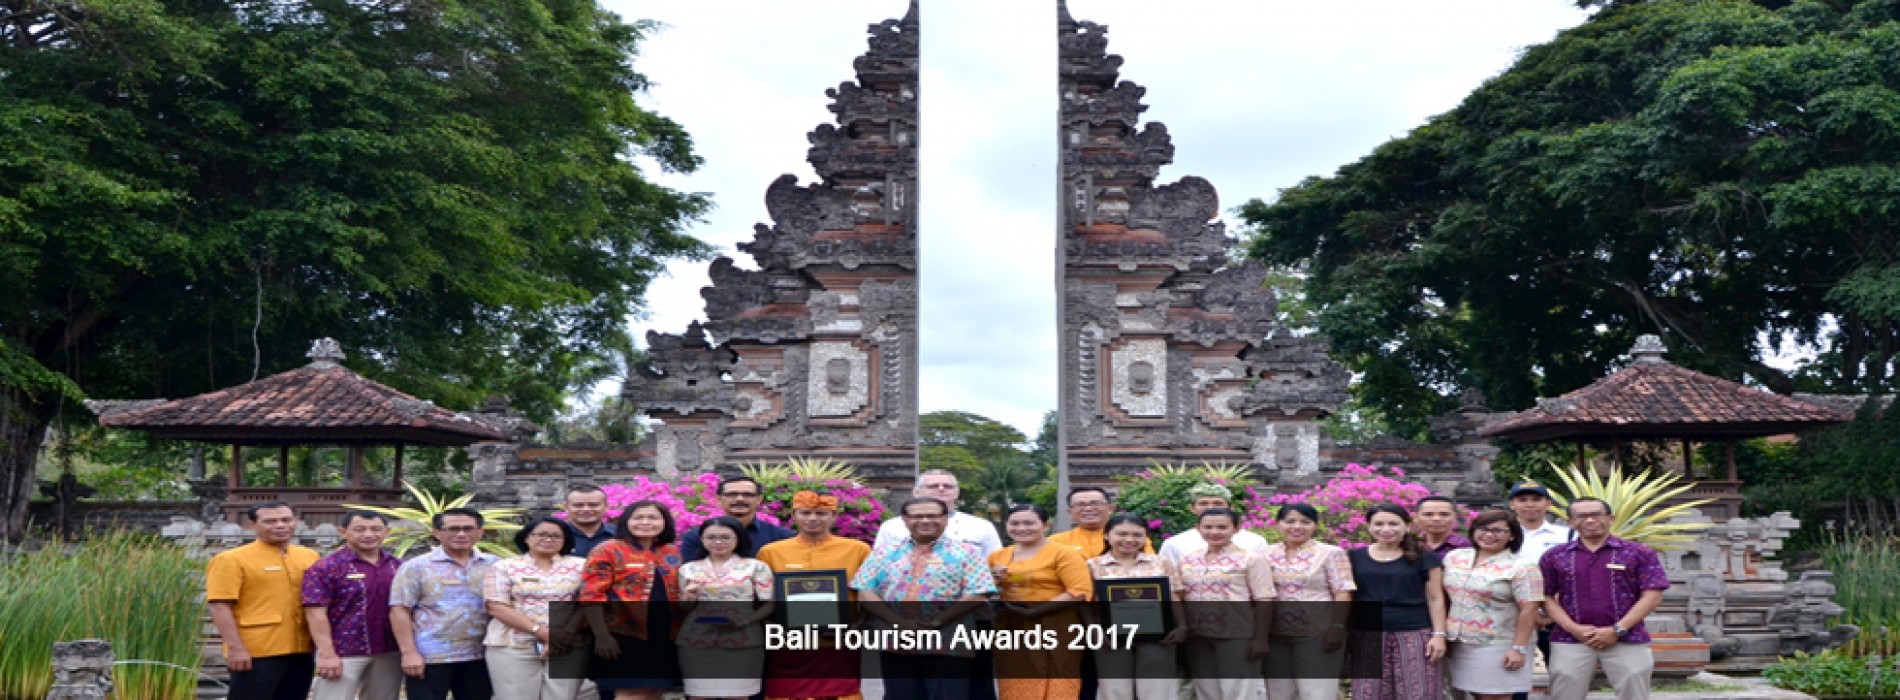 Nusa Dua Beach Hotel & Spa is a proud winner in the two categories of Bali Tourism Awards 2017